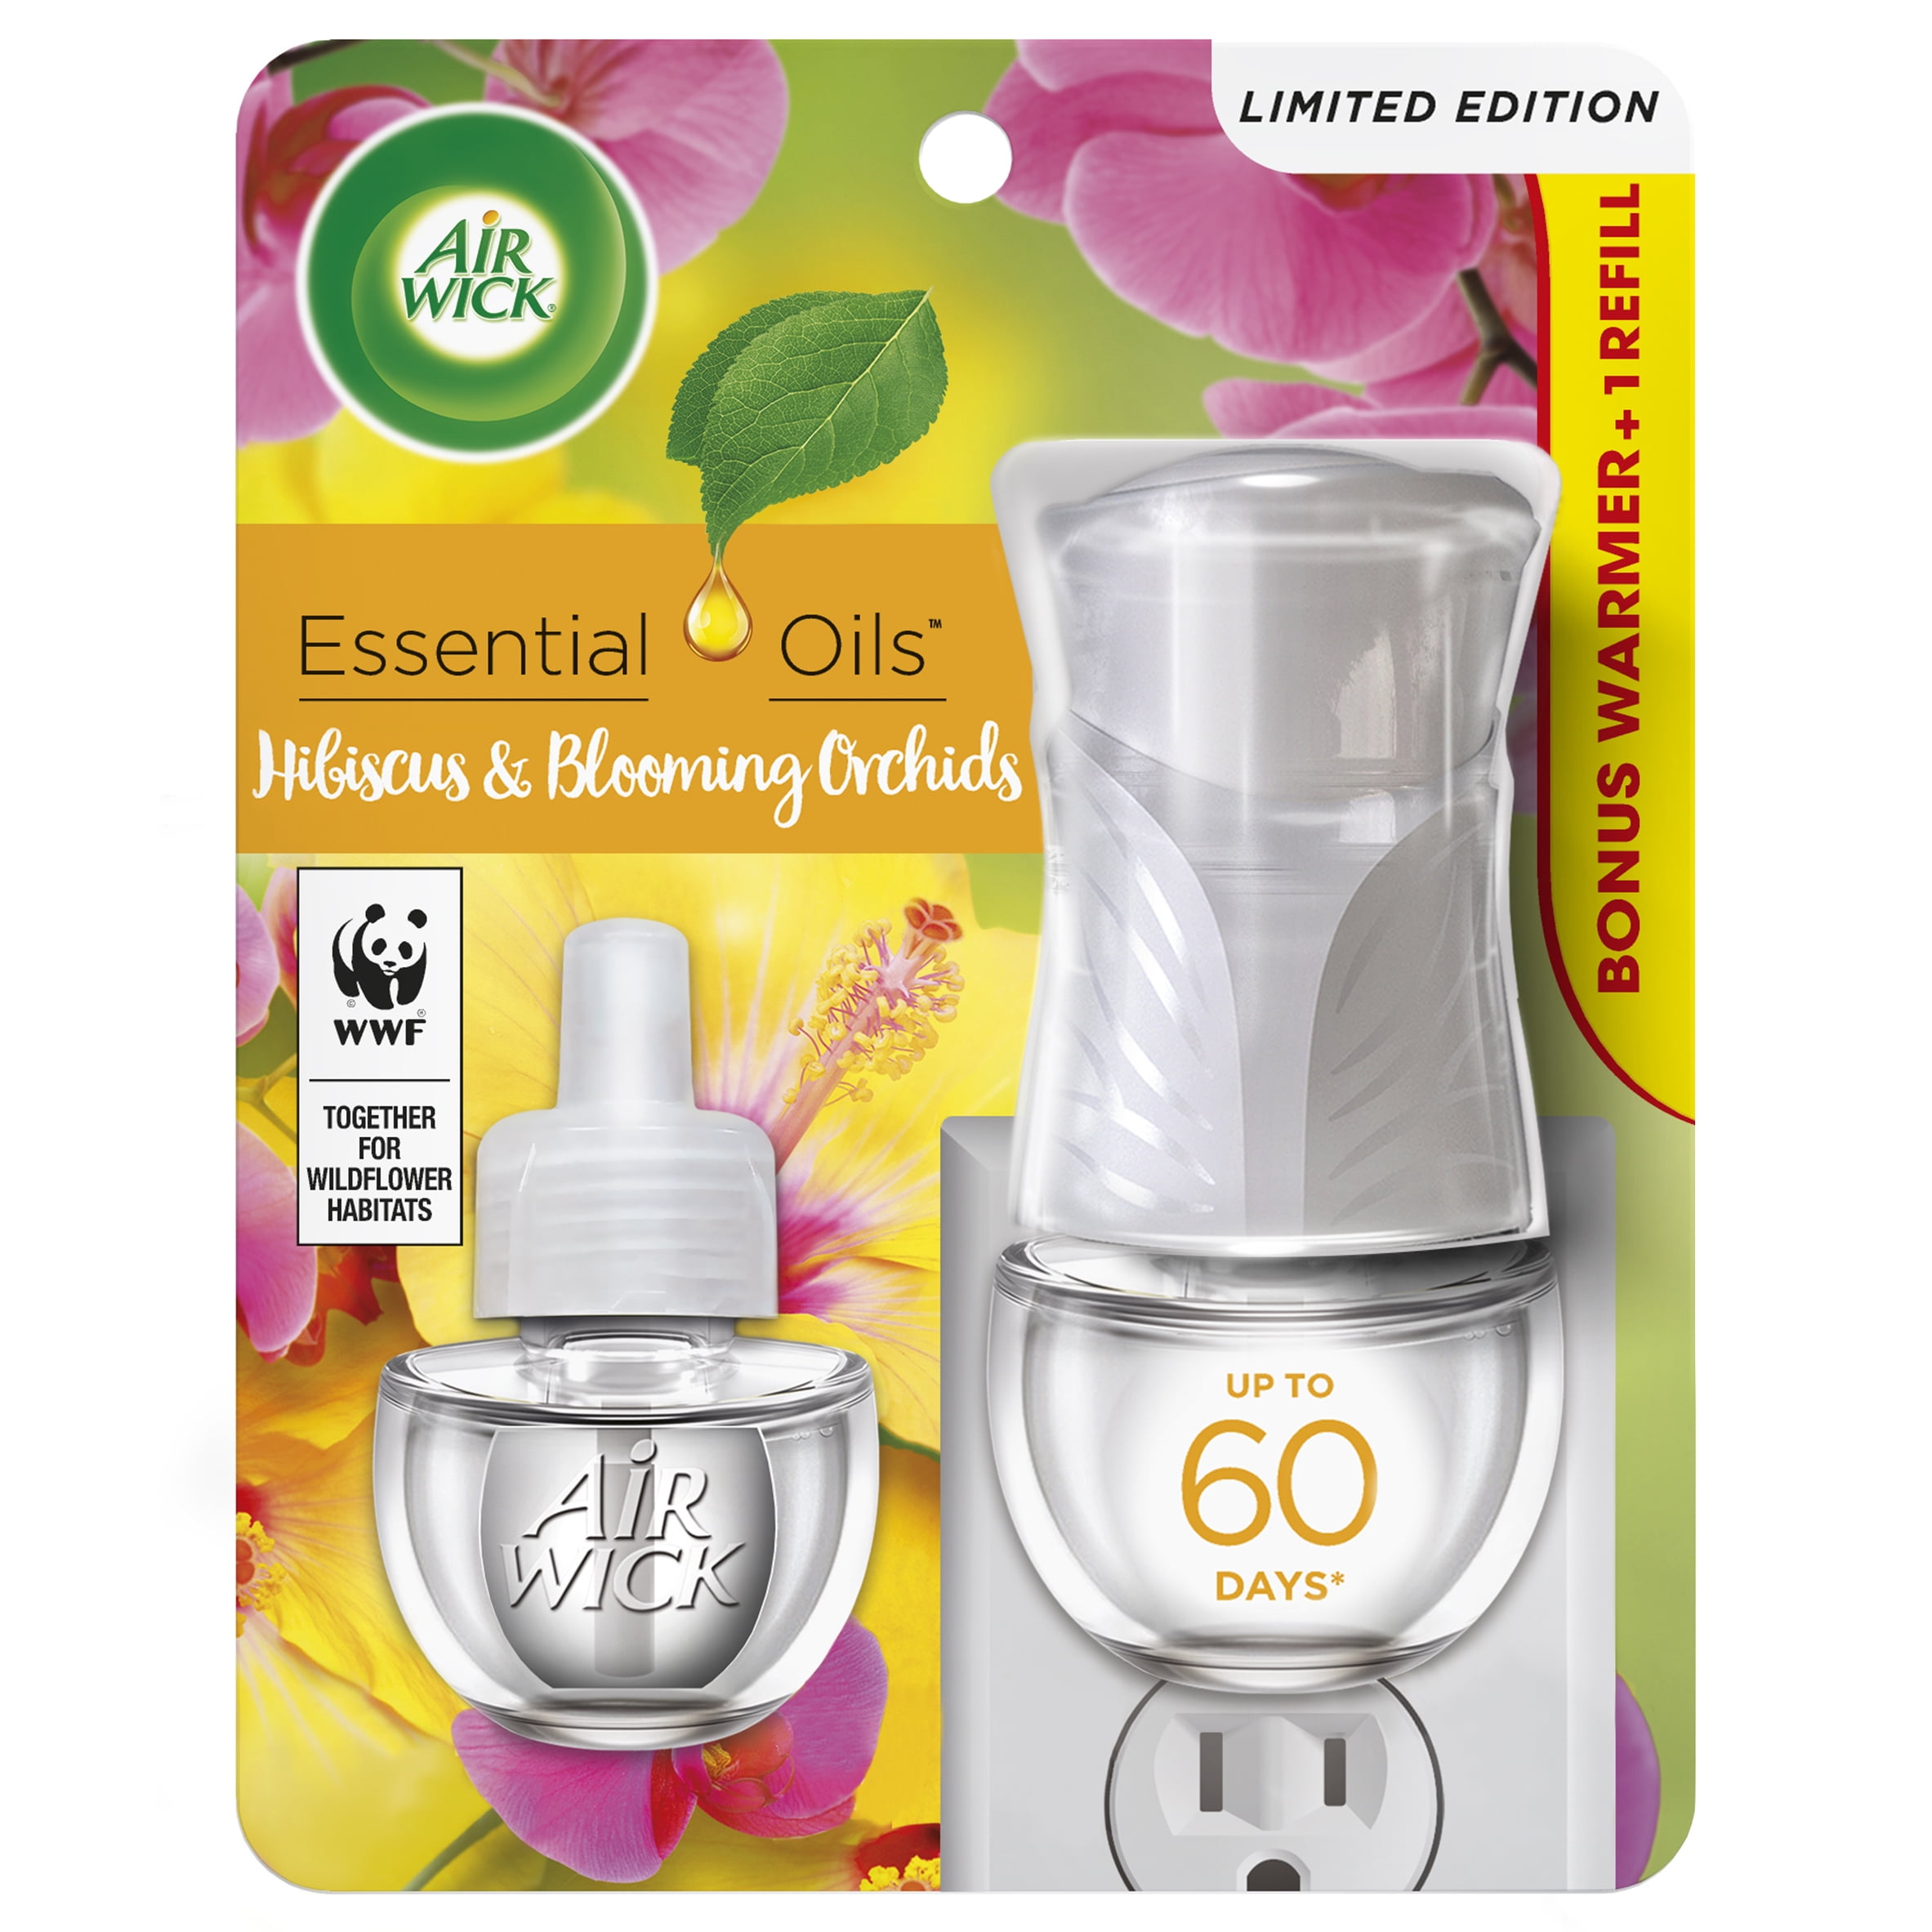 Air Wick Plug in Scented Oil Starter Kit (Warmer + 1 Refill), Hibiscus and  Blooming Orchids, Air Freshener, Essential Oils, Spring Collection